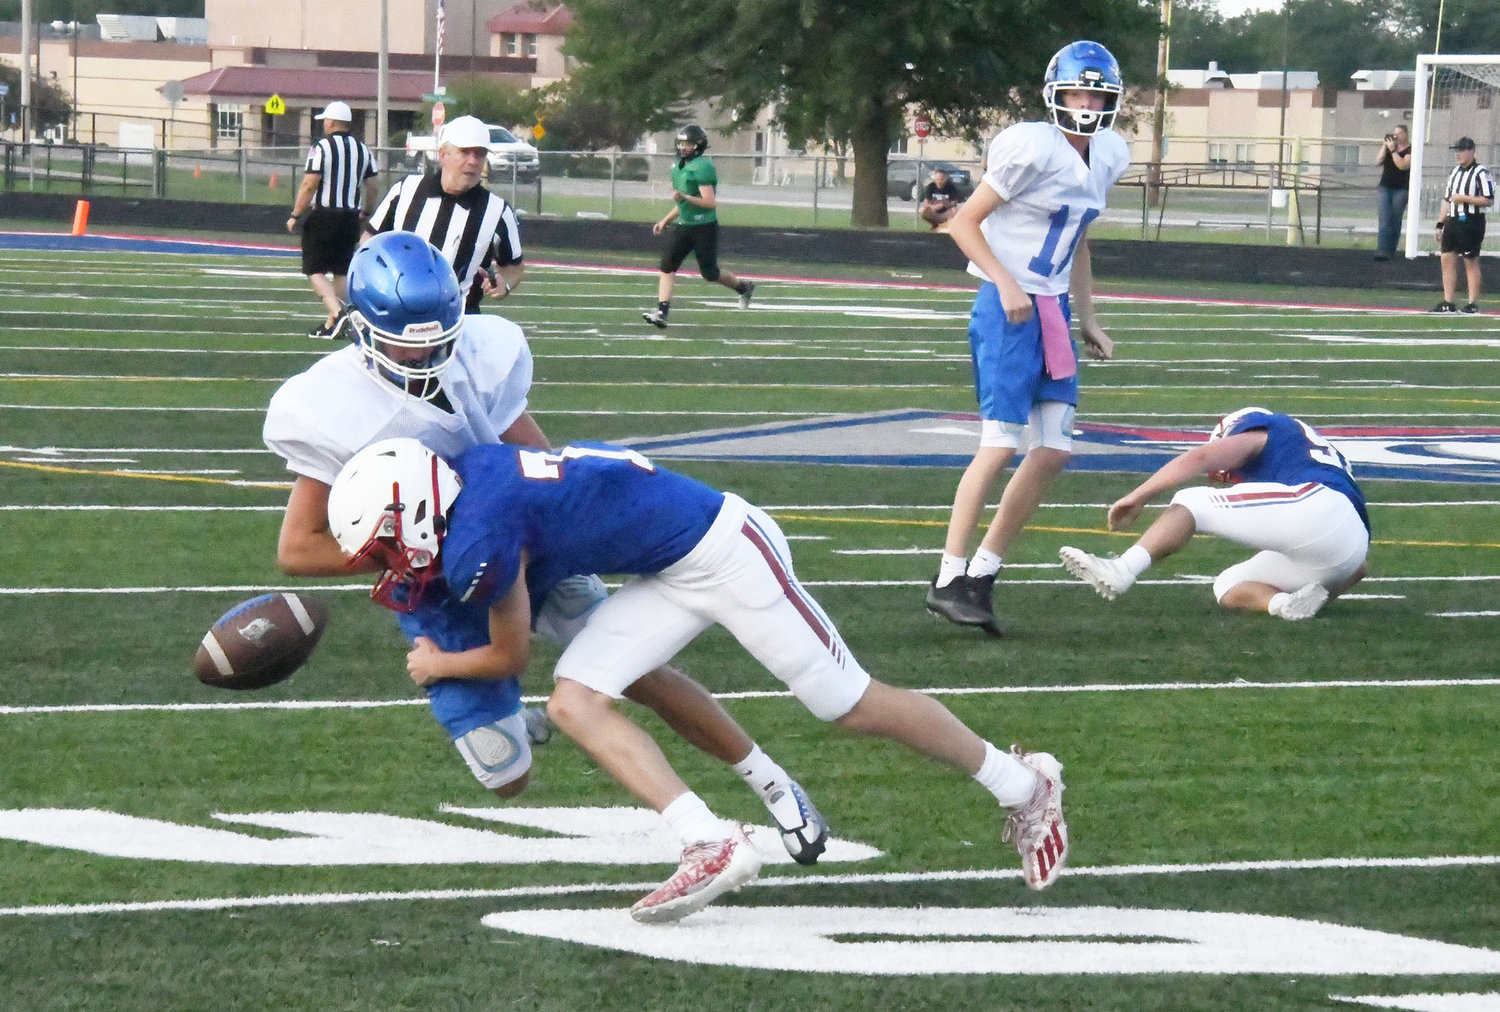 Moberly's Caden Hansen jars the ball loose, forcing a Boonville incomplete pass.